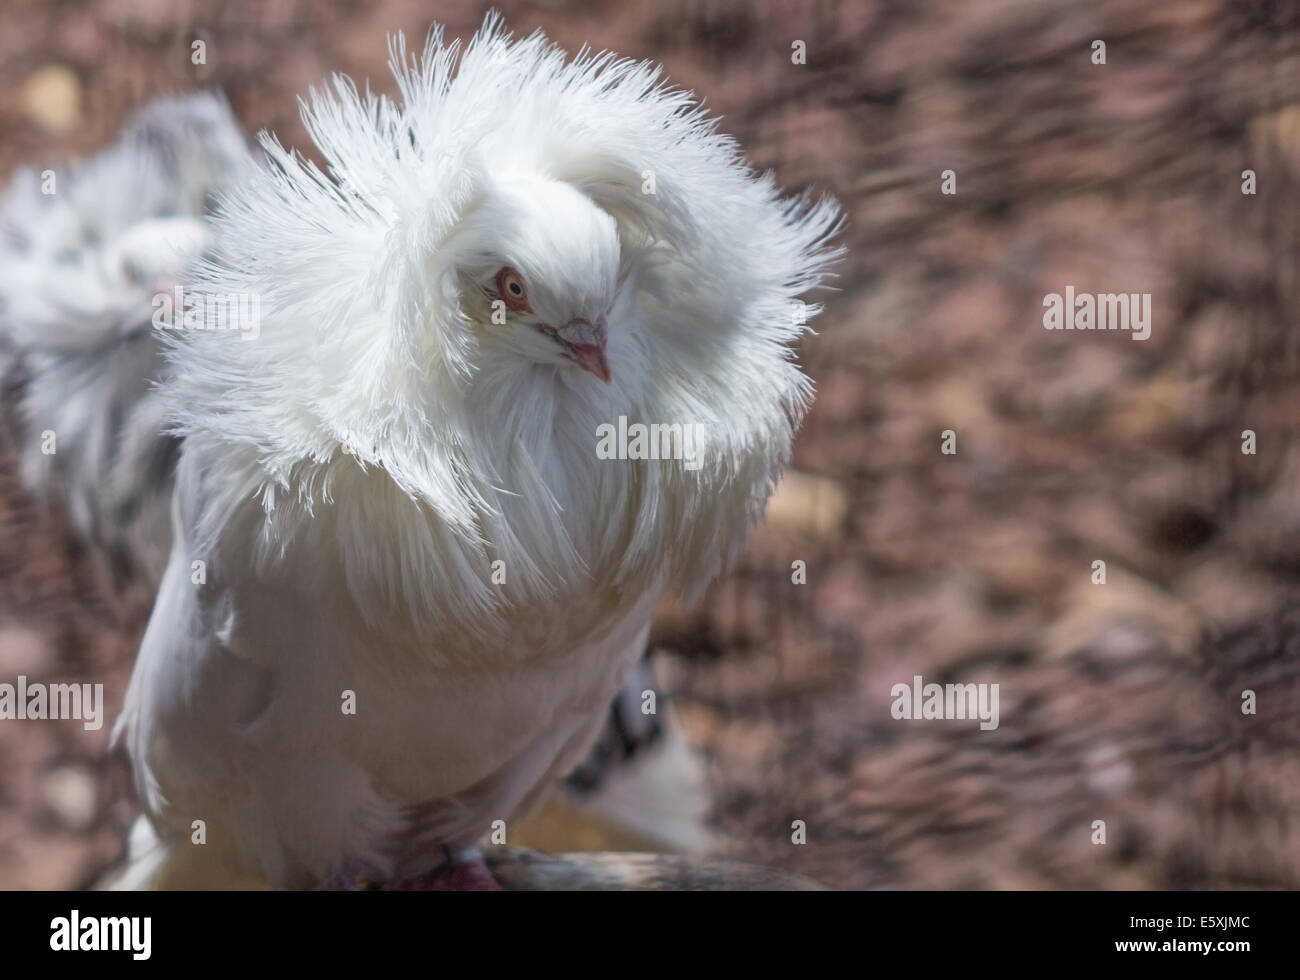 Jacobin Pigeon, with typical feathered Stock Photo